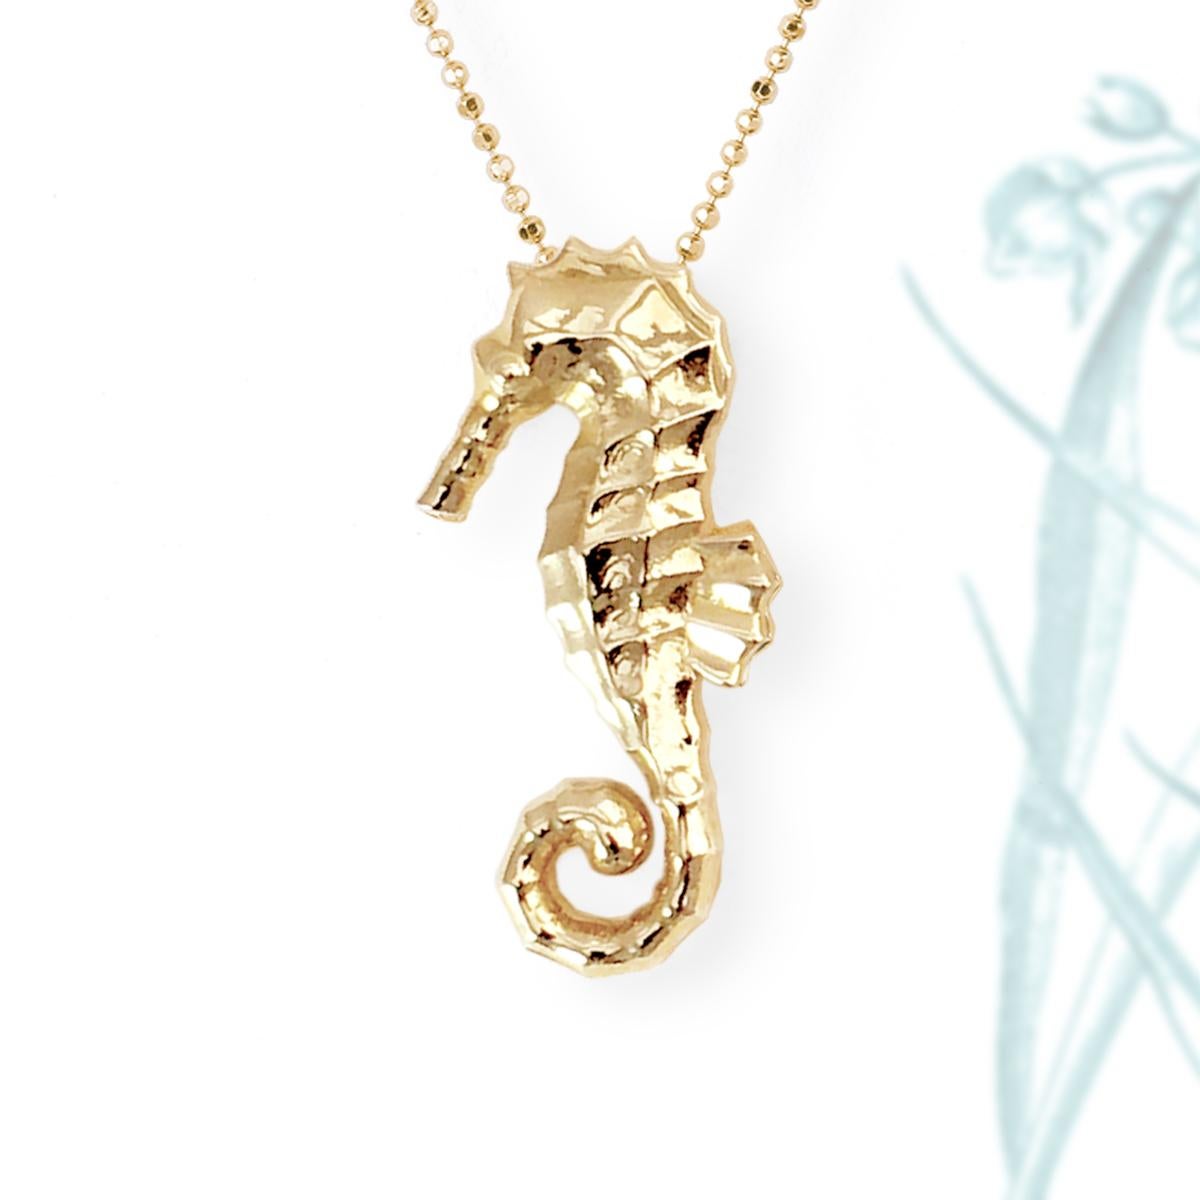 Indulge in the captivating beauty of the ocean with our Large Seahorse Pendant in Solid Yellow Gold. This limited edition piece, designed by J.Herwitt and handcrafted in Los Angeles, California, is a true work of art.

Crafted from 14 solid yellow